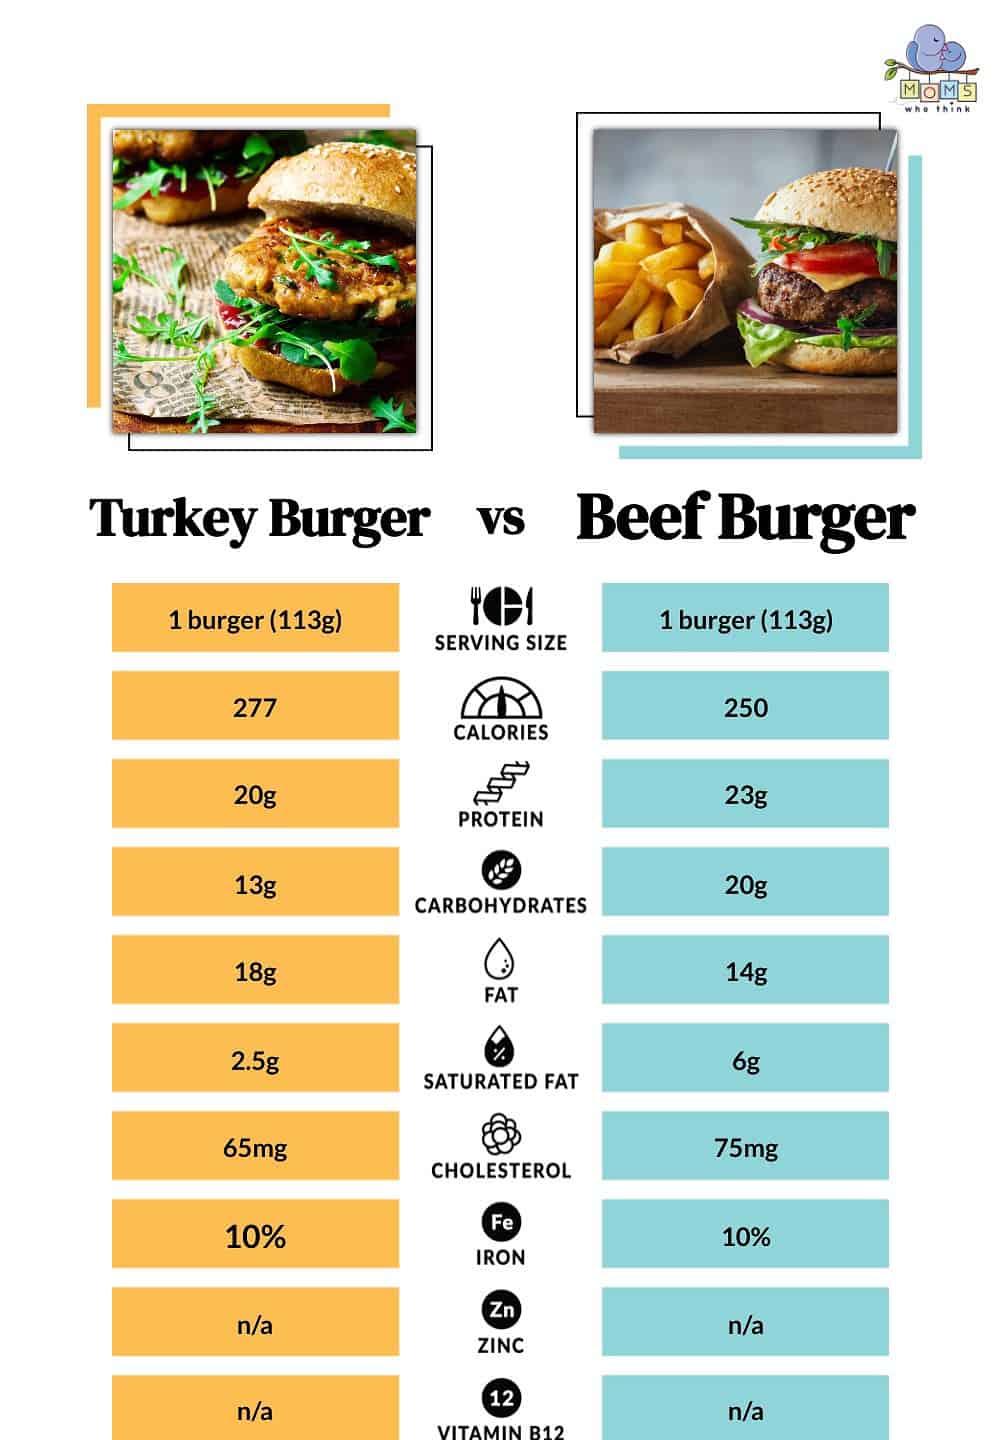 Turkey Burger vs. Beef Burger: Which One Is Healthier For You?